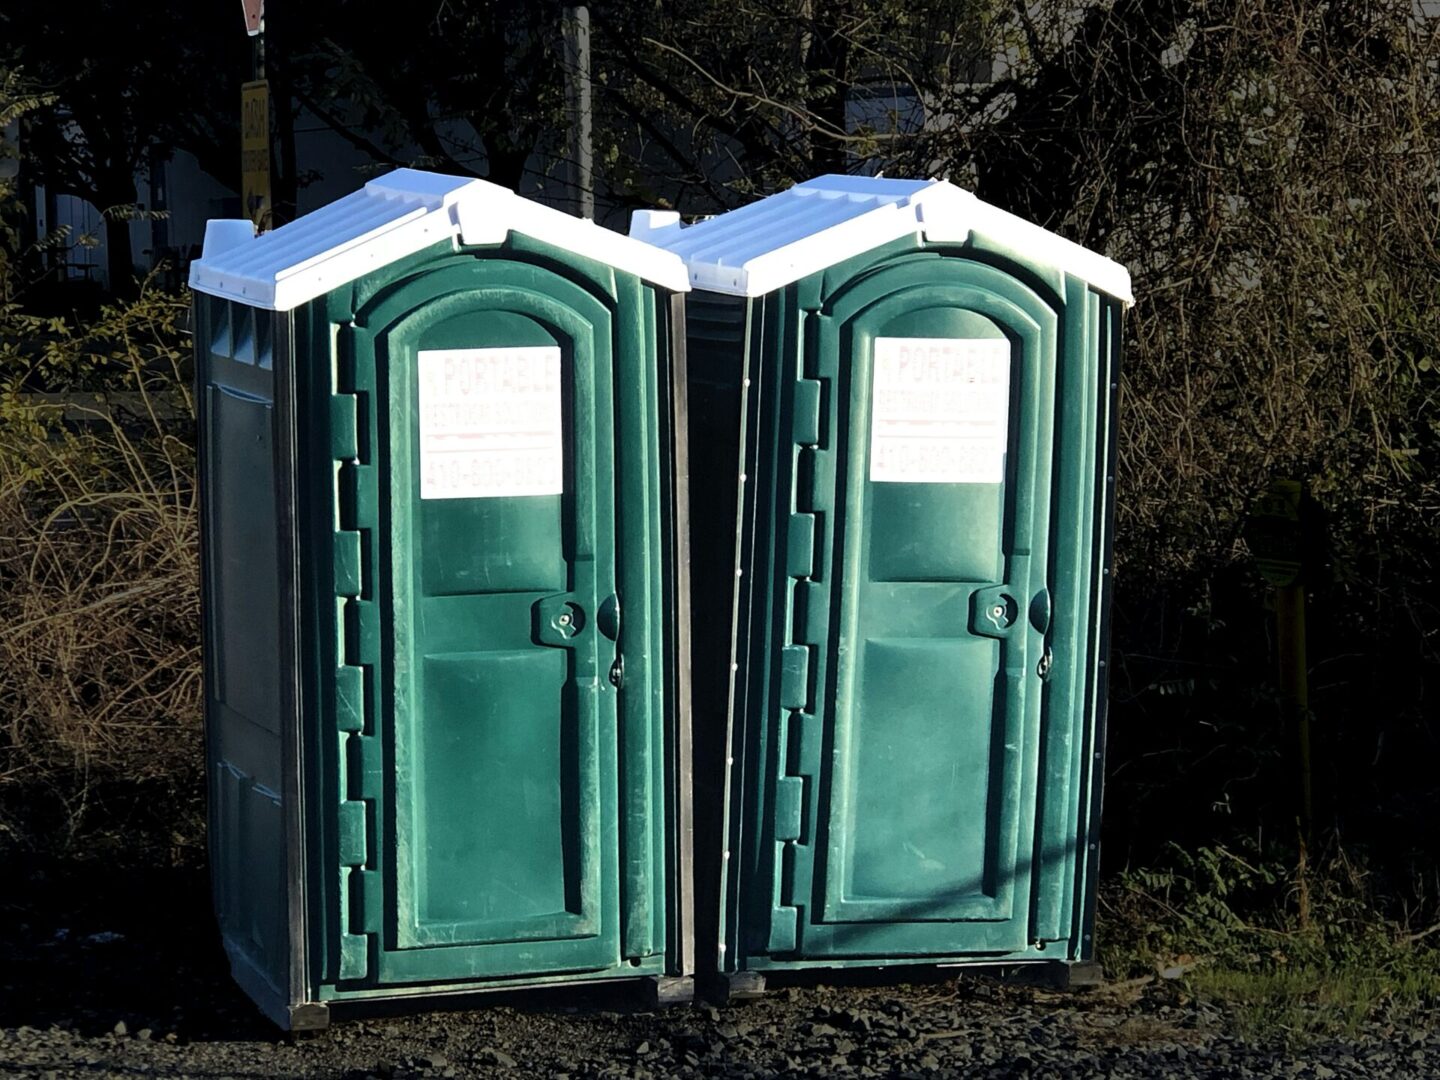 Two green portable toilets side by side in bright sunlight.